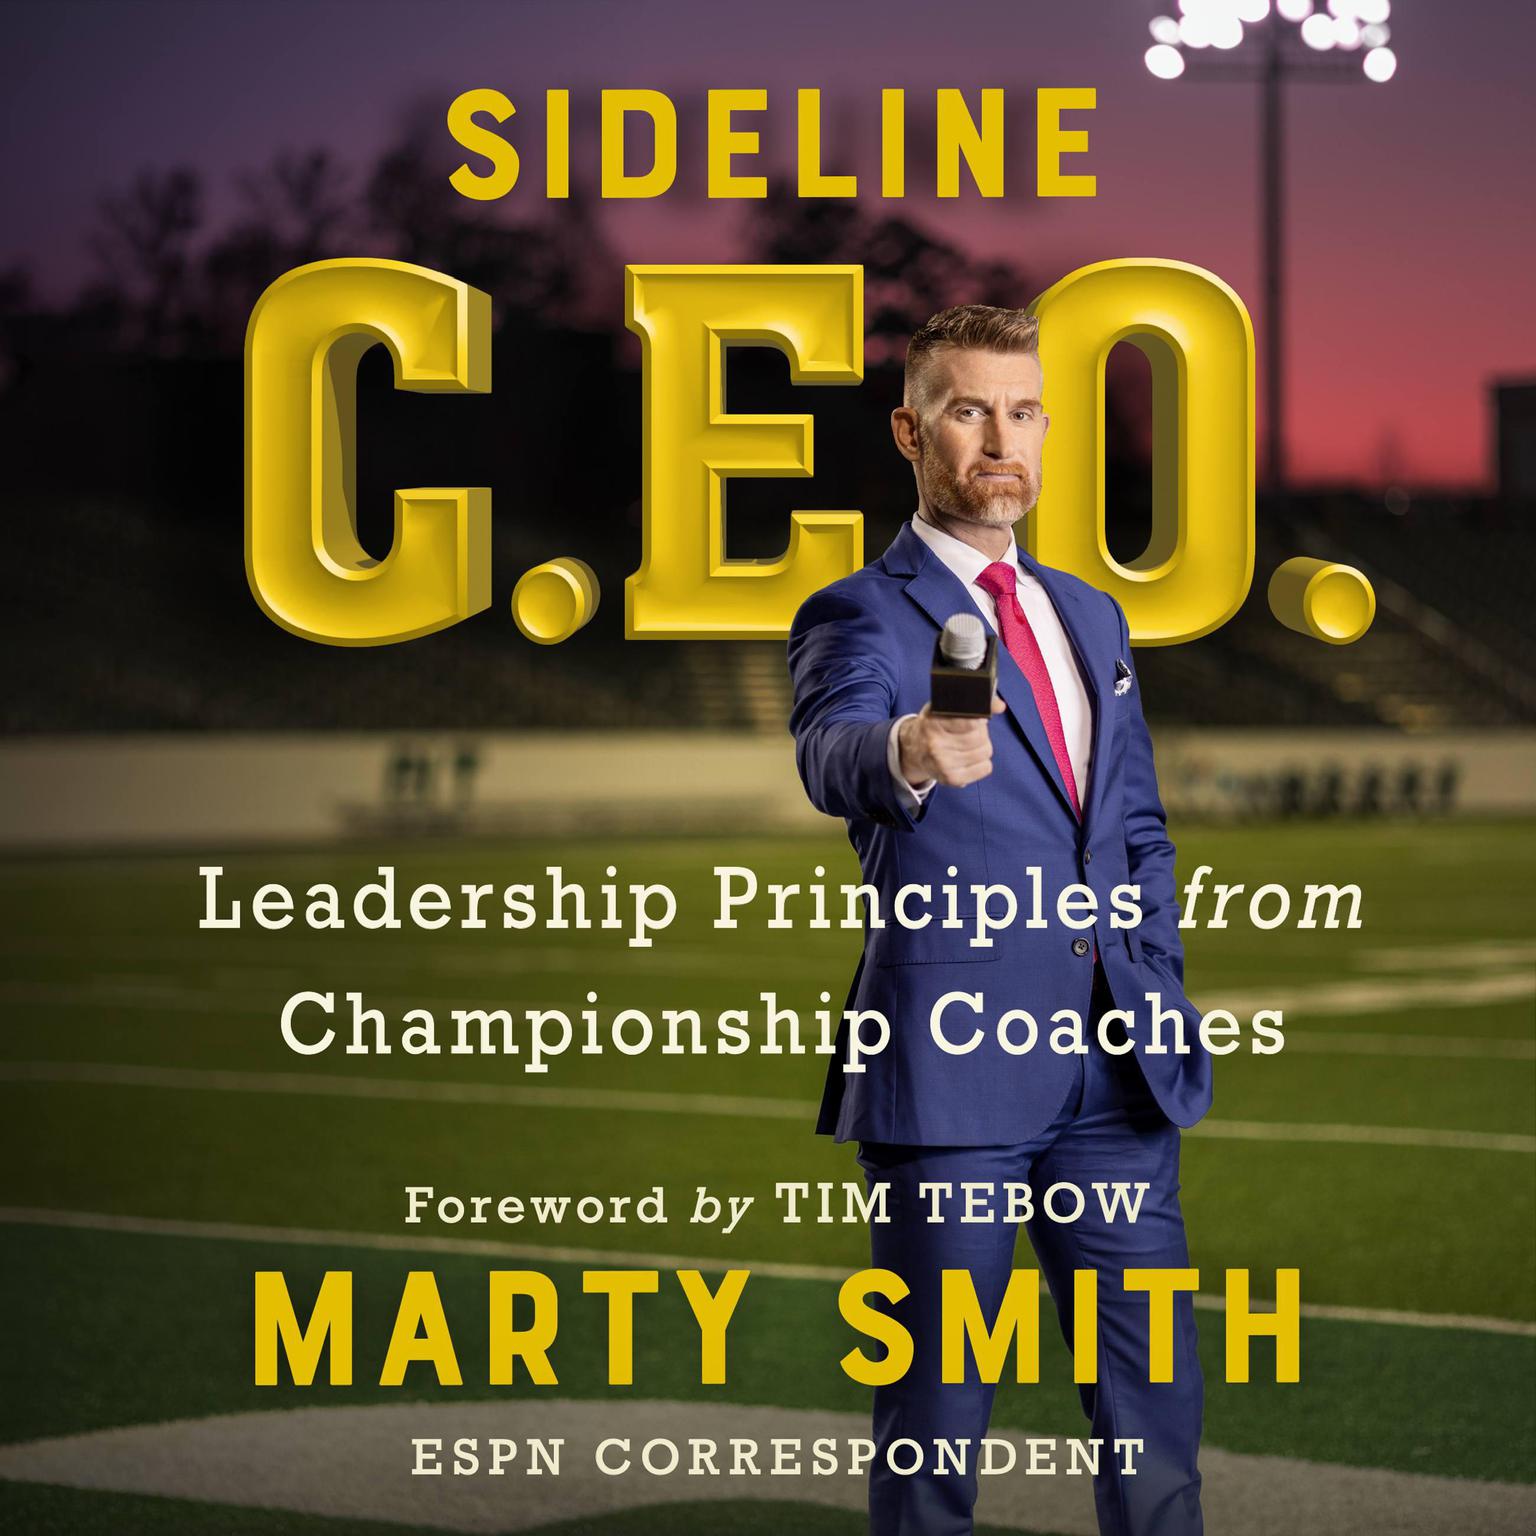 Sideline CEO: Leadership Principles from Championship Coaches Audiobook, by Marty Smith